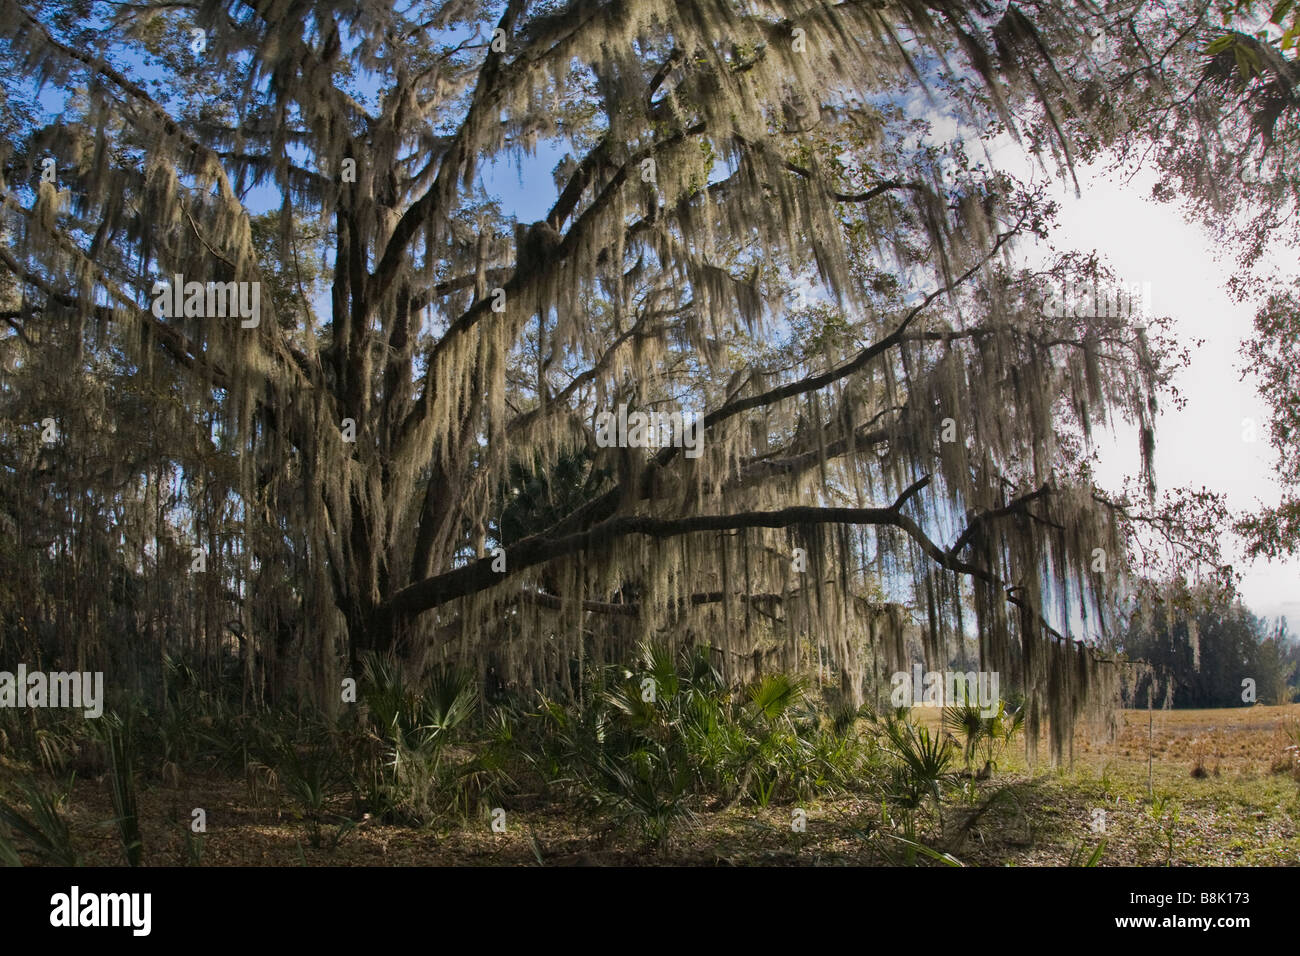 Live Oak tree covered in Spanish Moss in Paynes Prairie Preserve State Park in Micanopy near Gainesville Florida Stock Photo